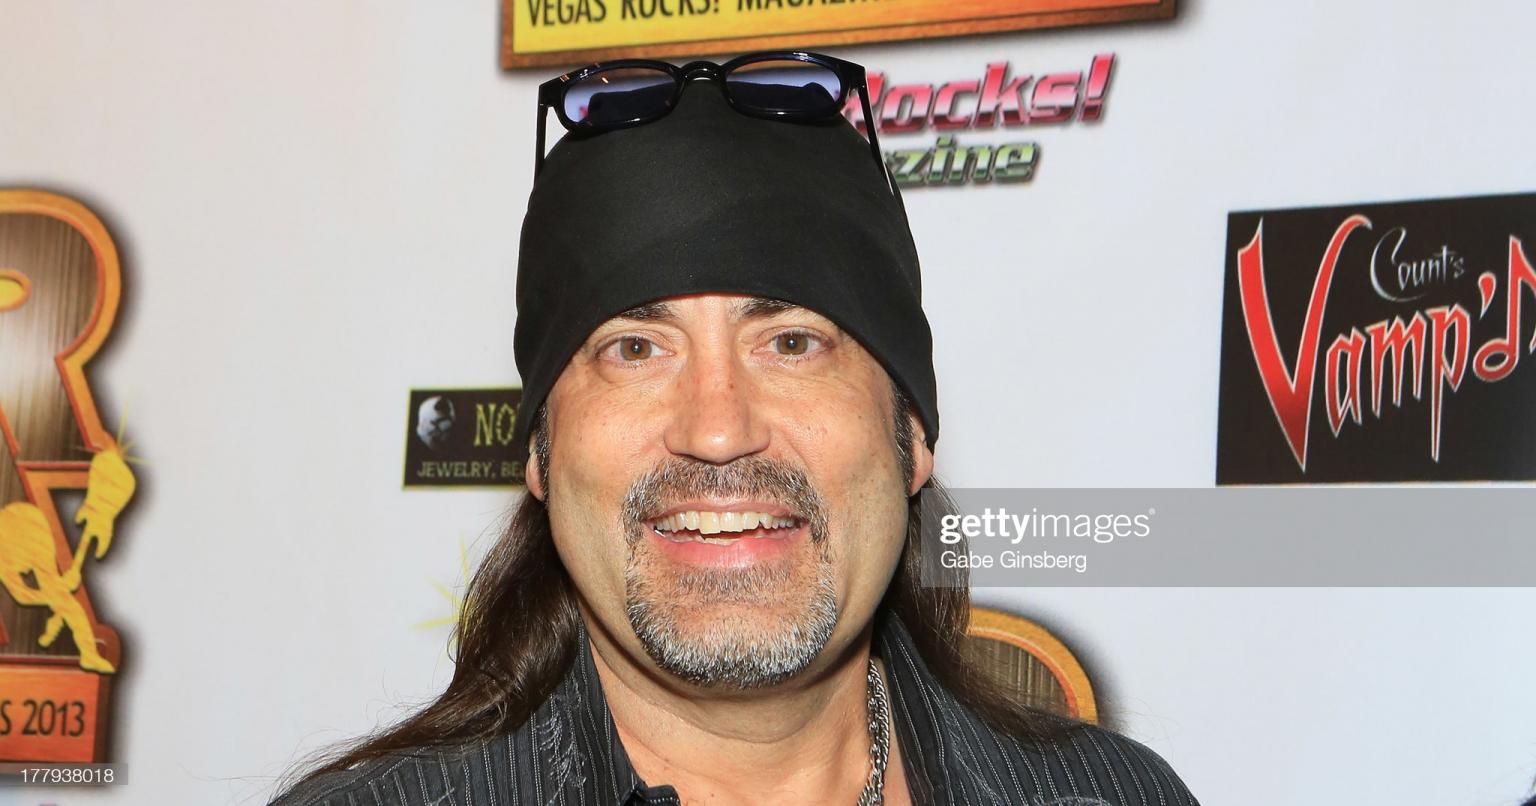 How rich is Danny Koker from 